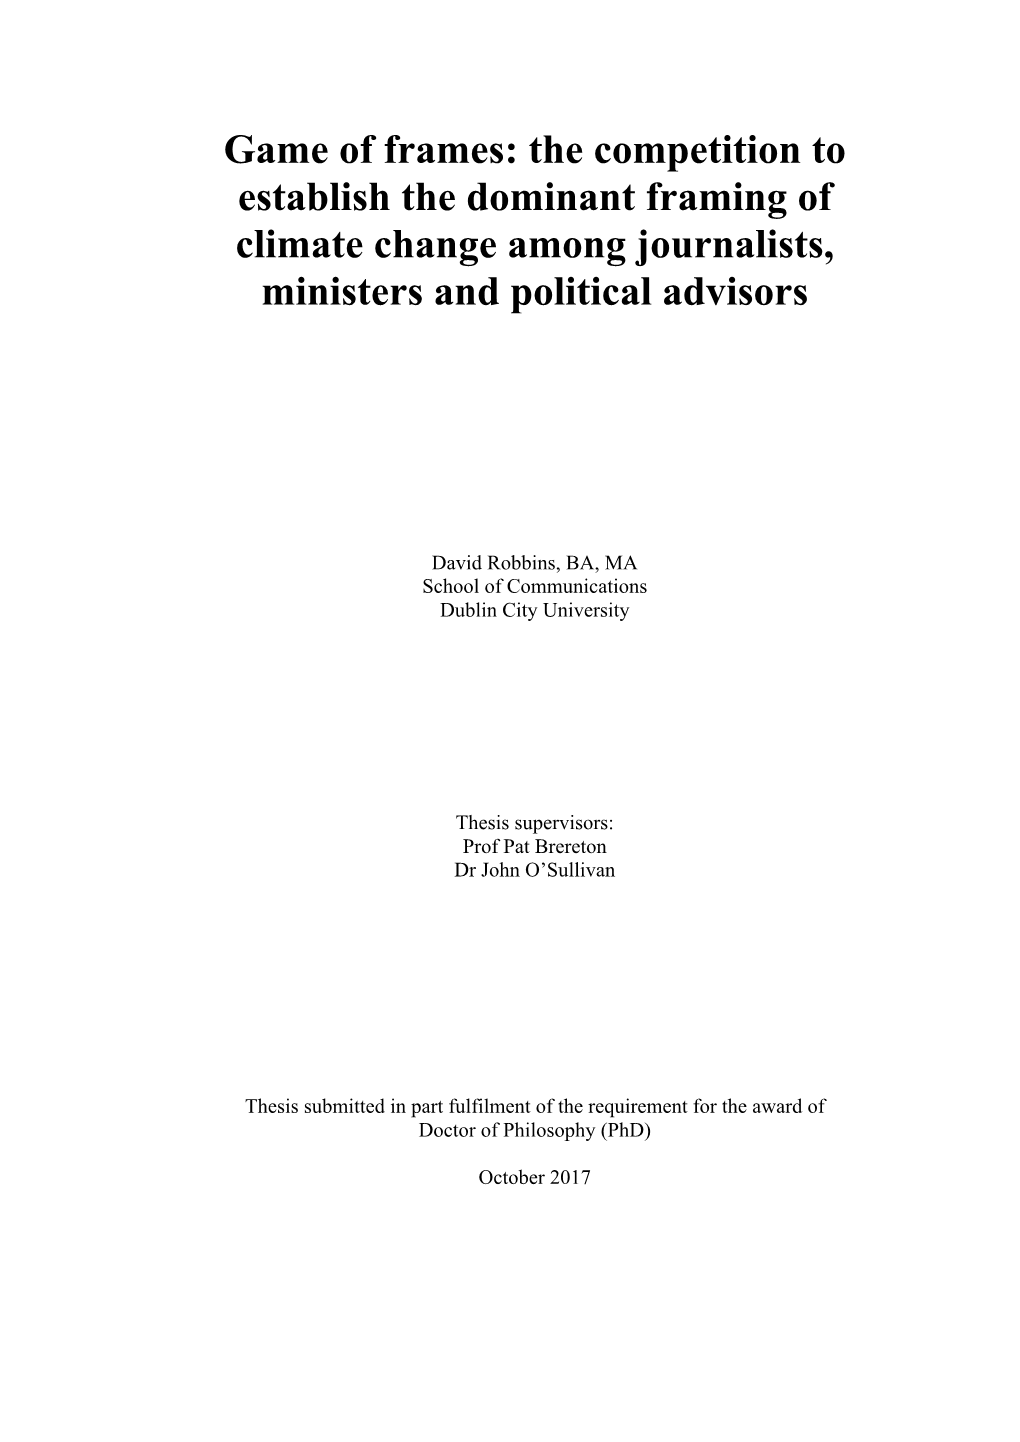 The Competition to Establish the Dominant Framing of Climate Change Among Journalists, Ministers and Political Advisors